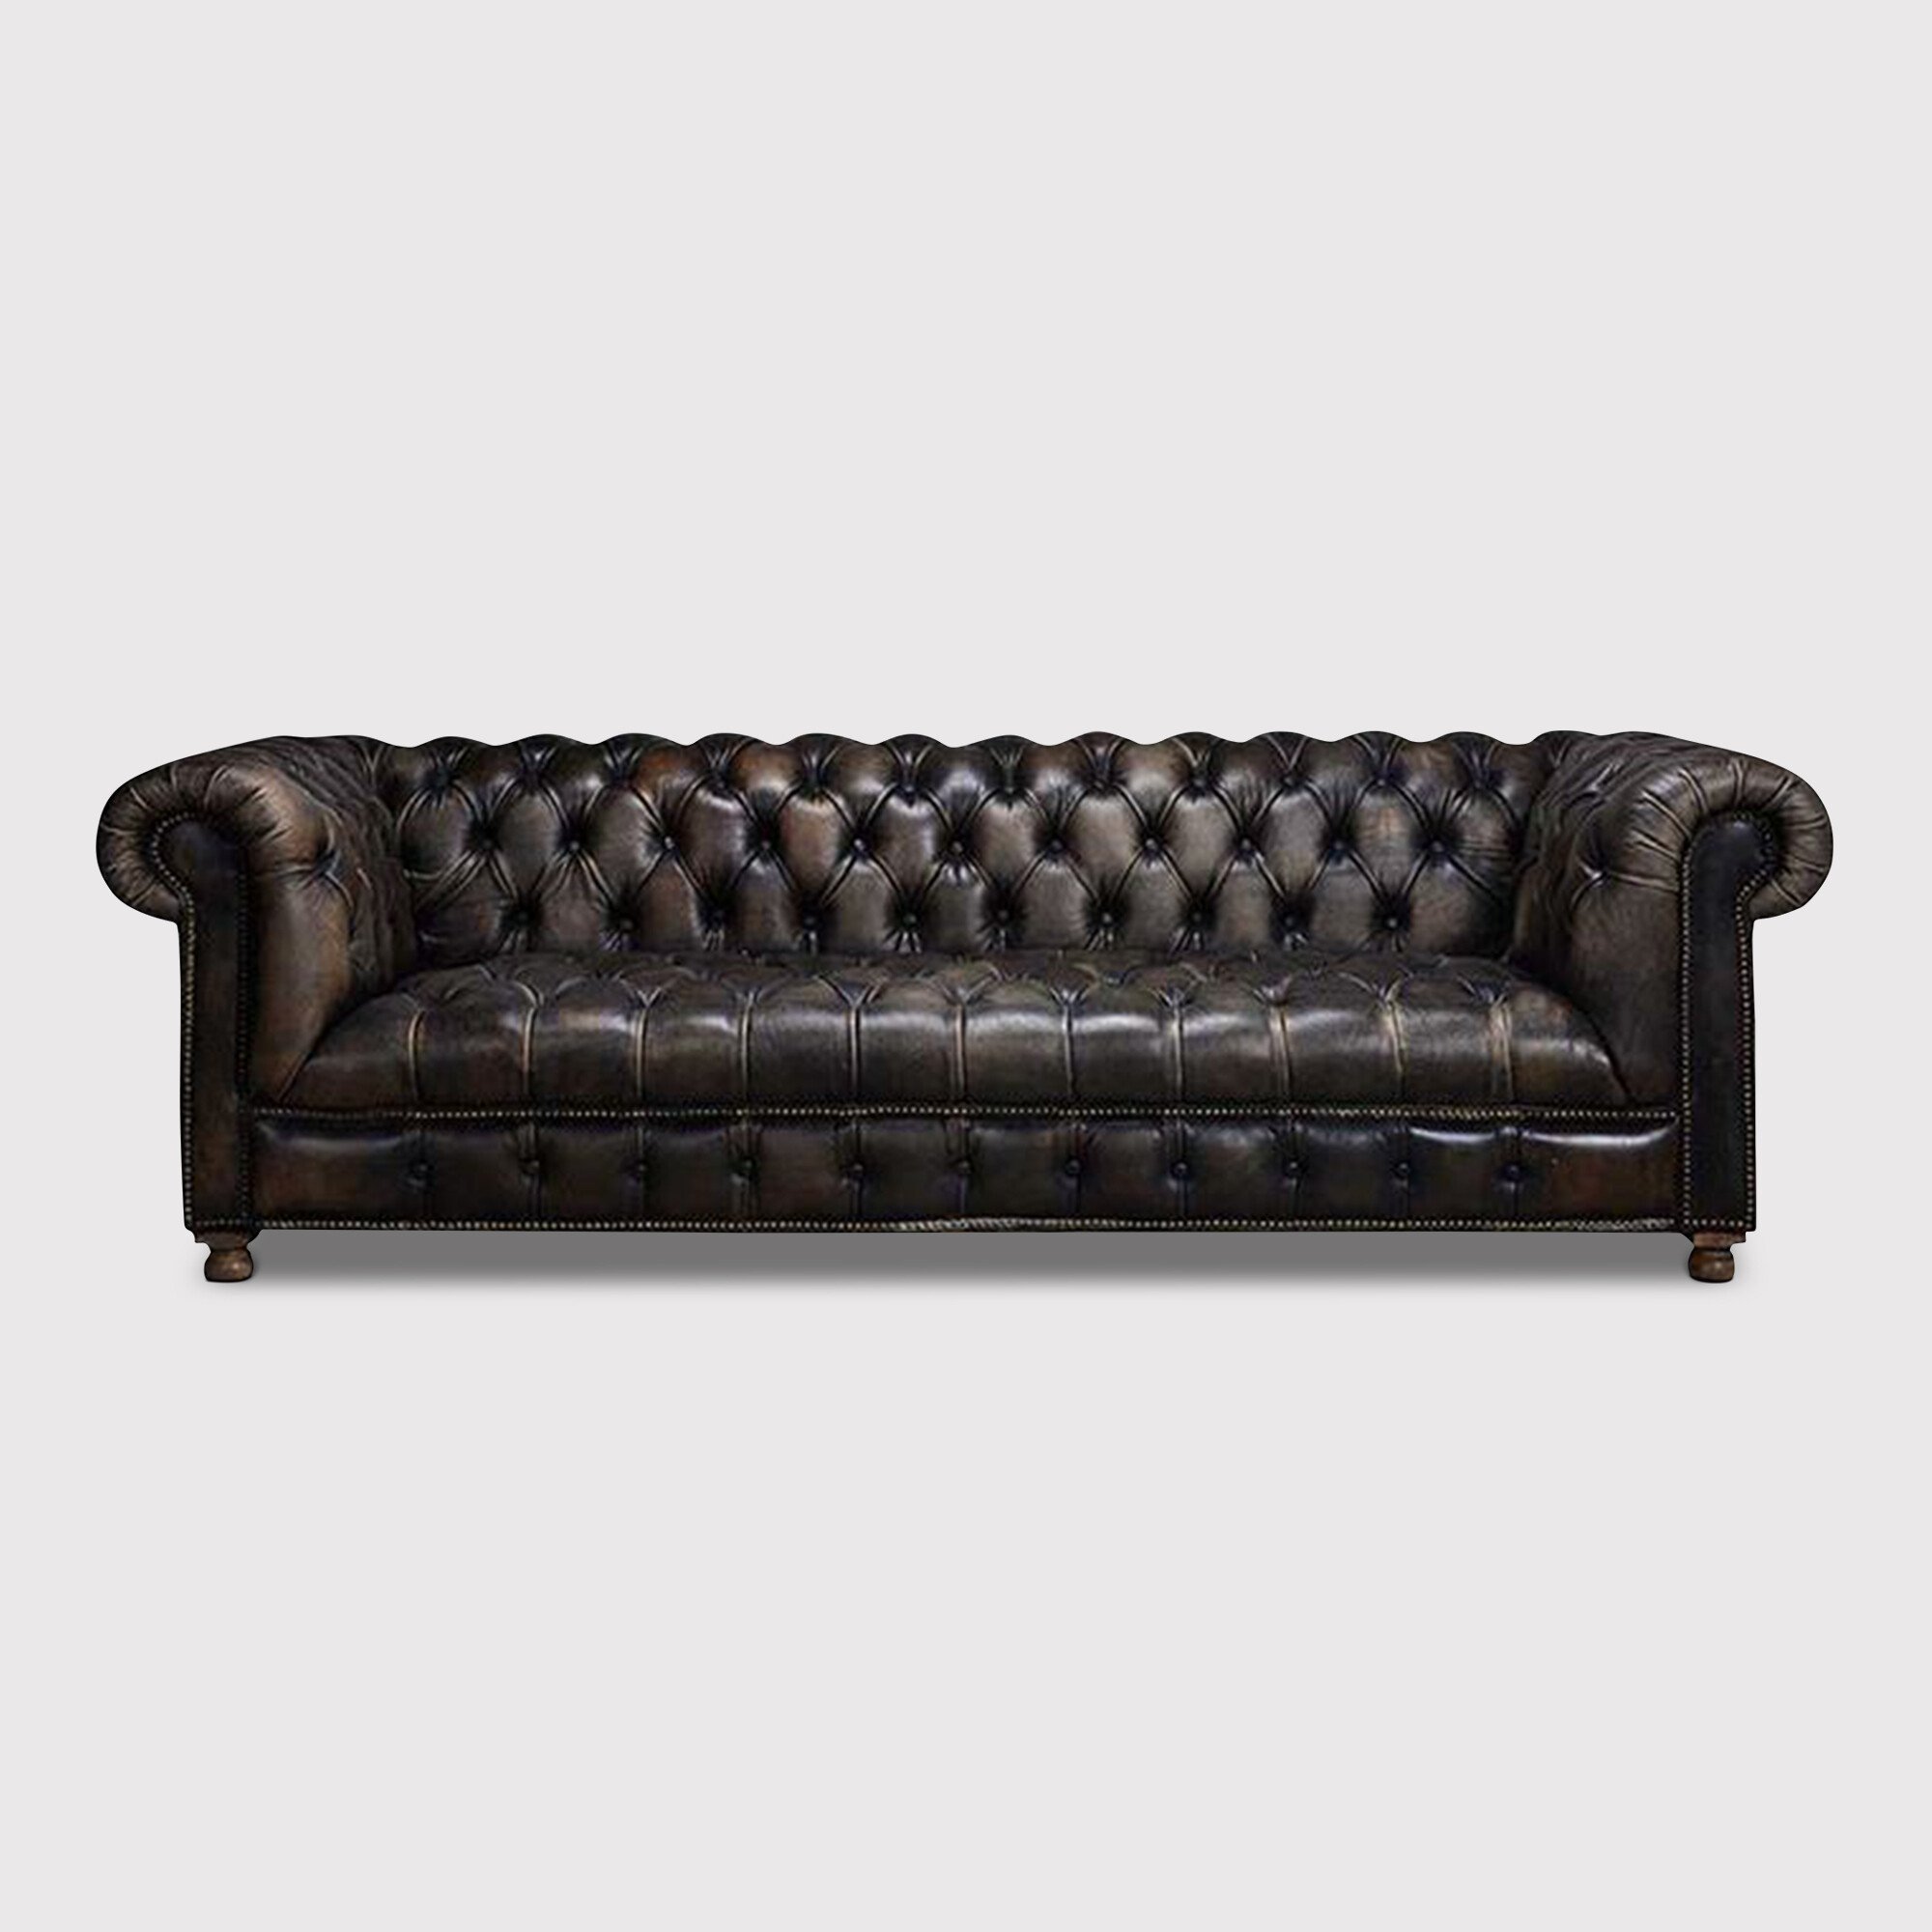 Timothy Oulton Westminster Button Chesterfield Sofa 2.5 Seater, Black Leather | Barker & Stonehouse